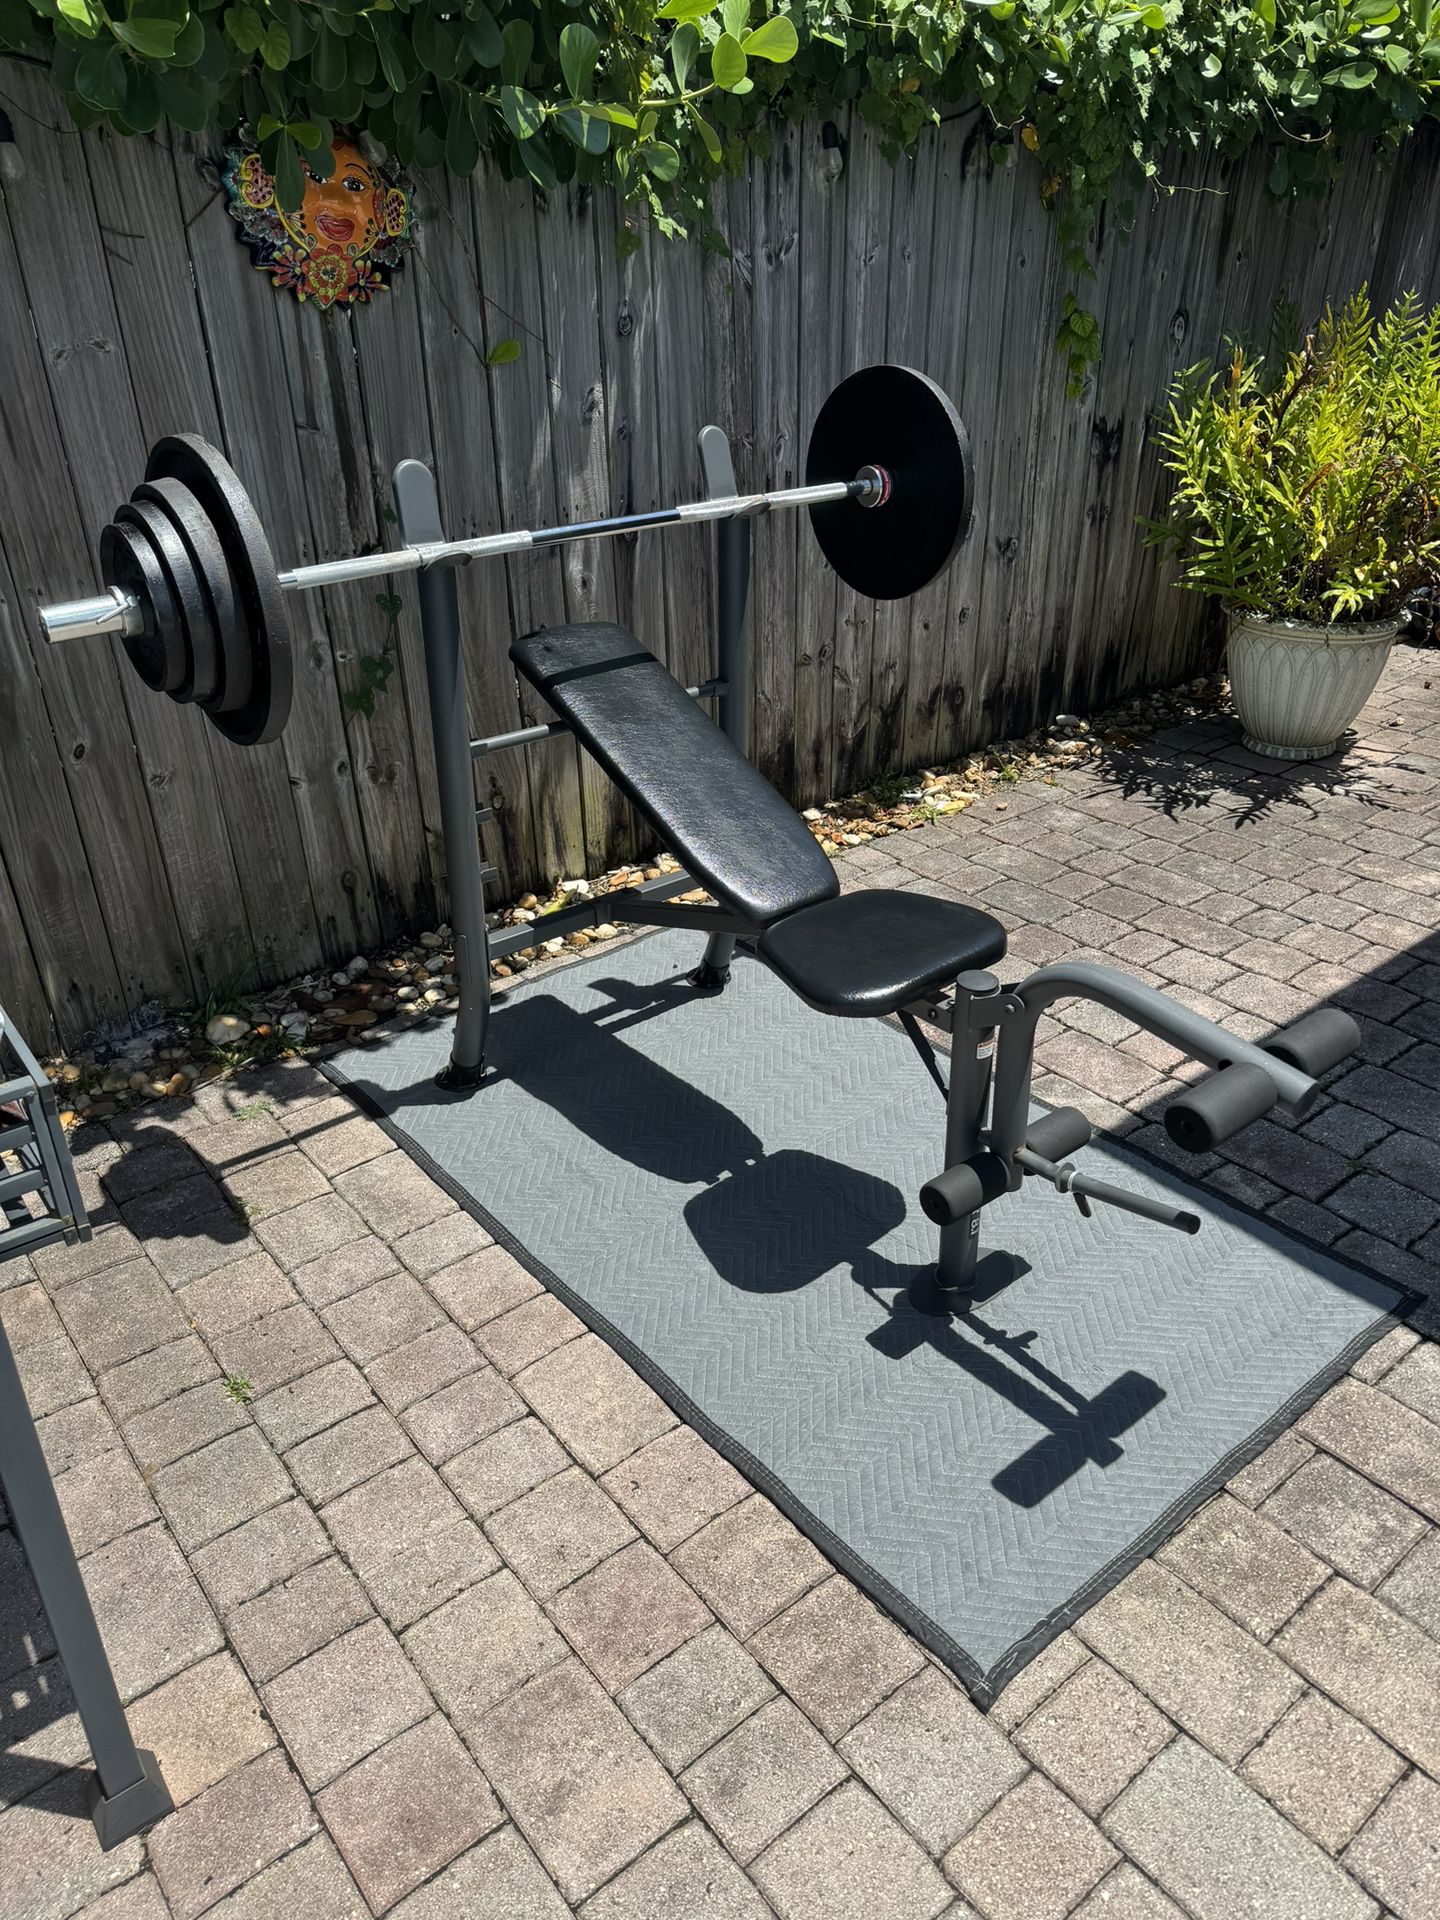 2” Olympic Style Workout set. Over 260lbs in total weight. Everything in pics is included for the price. 